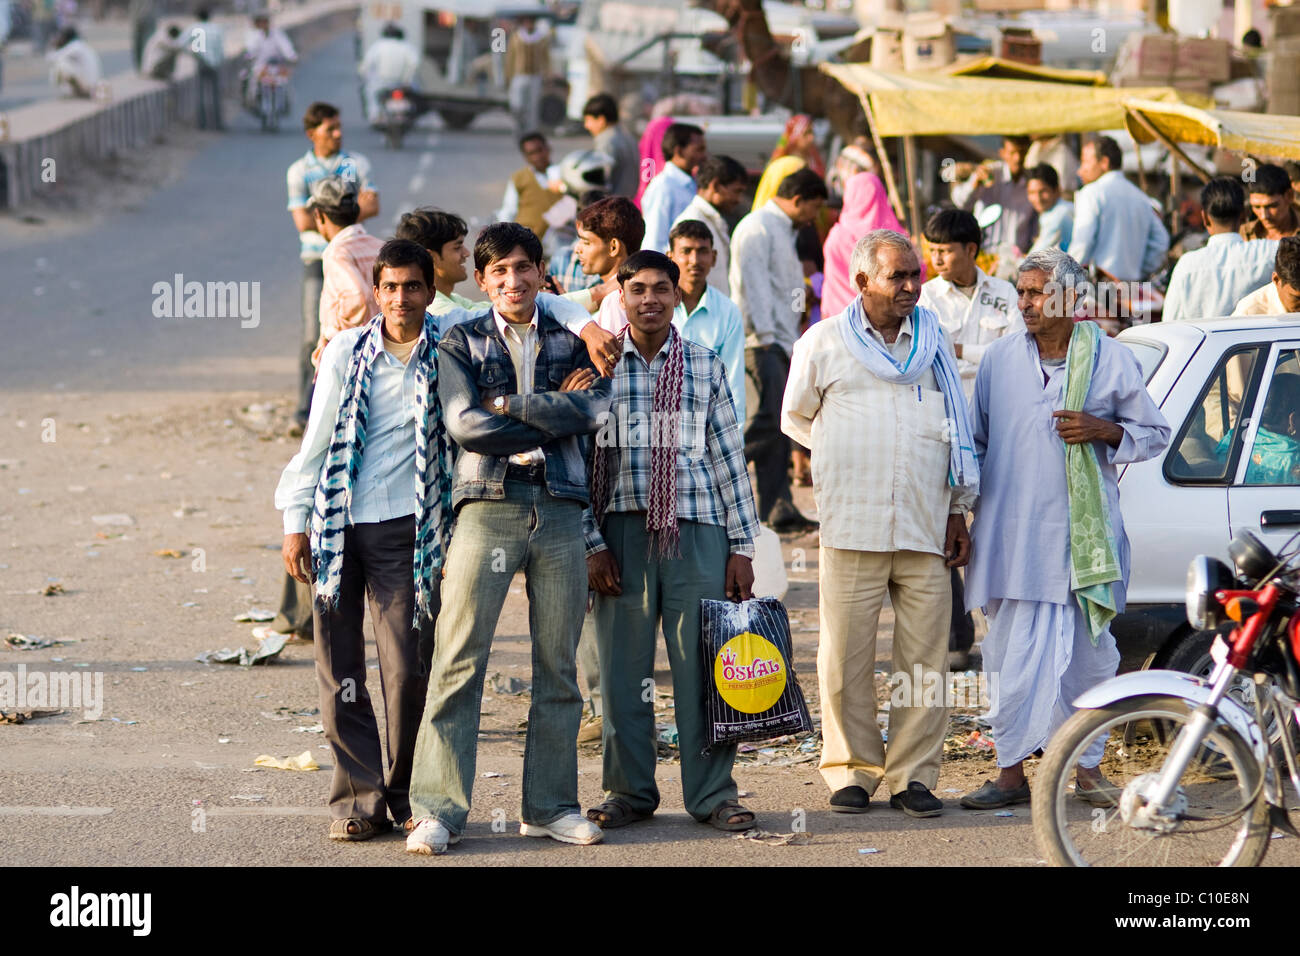 Street scene on a way into Agra, young Indian man looking into camera, India Stock Photo